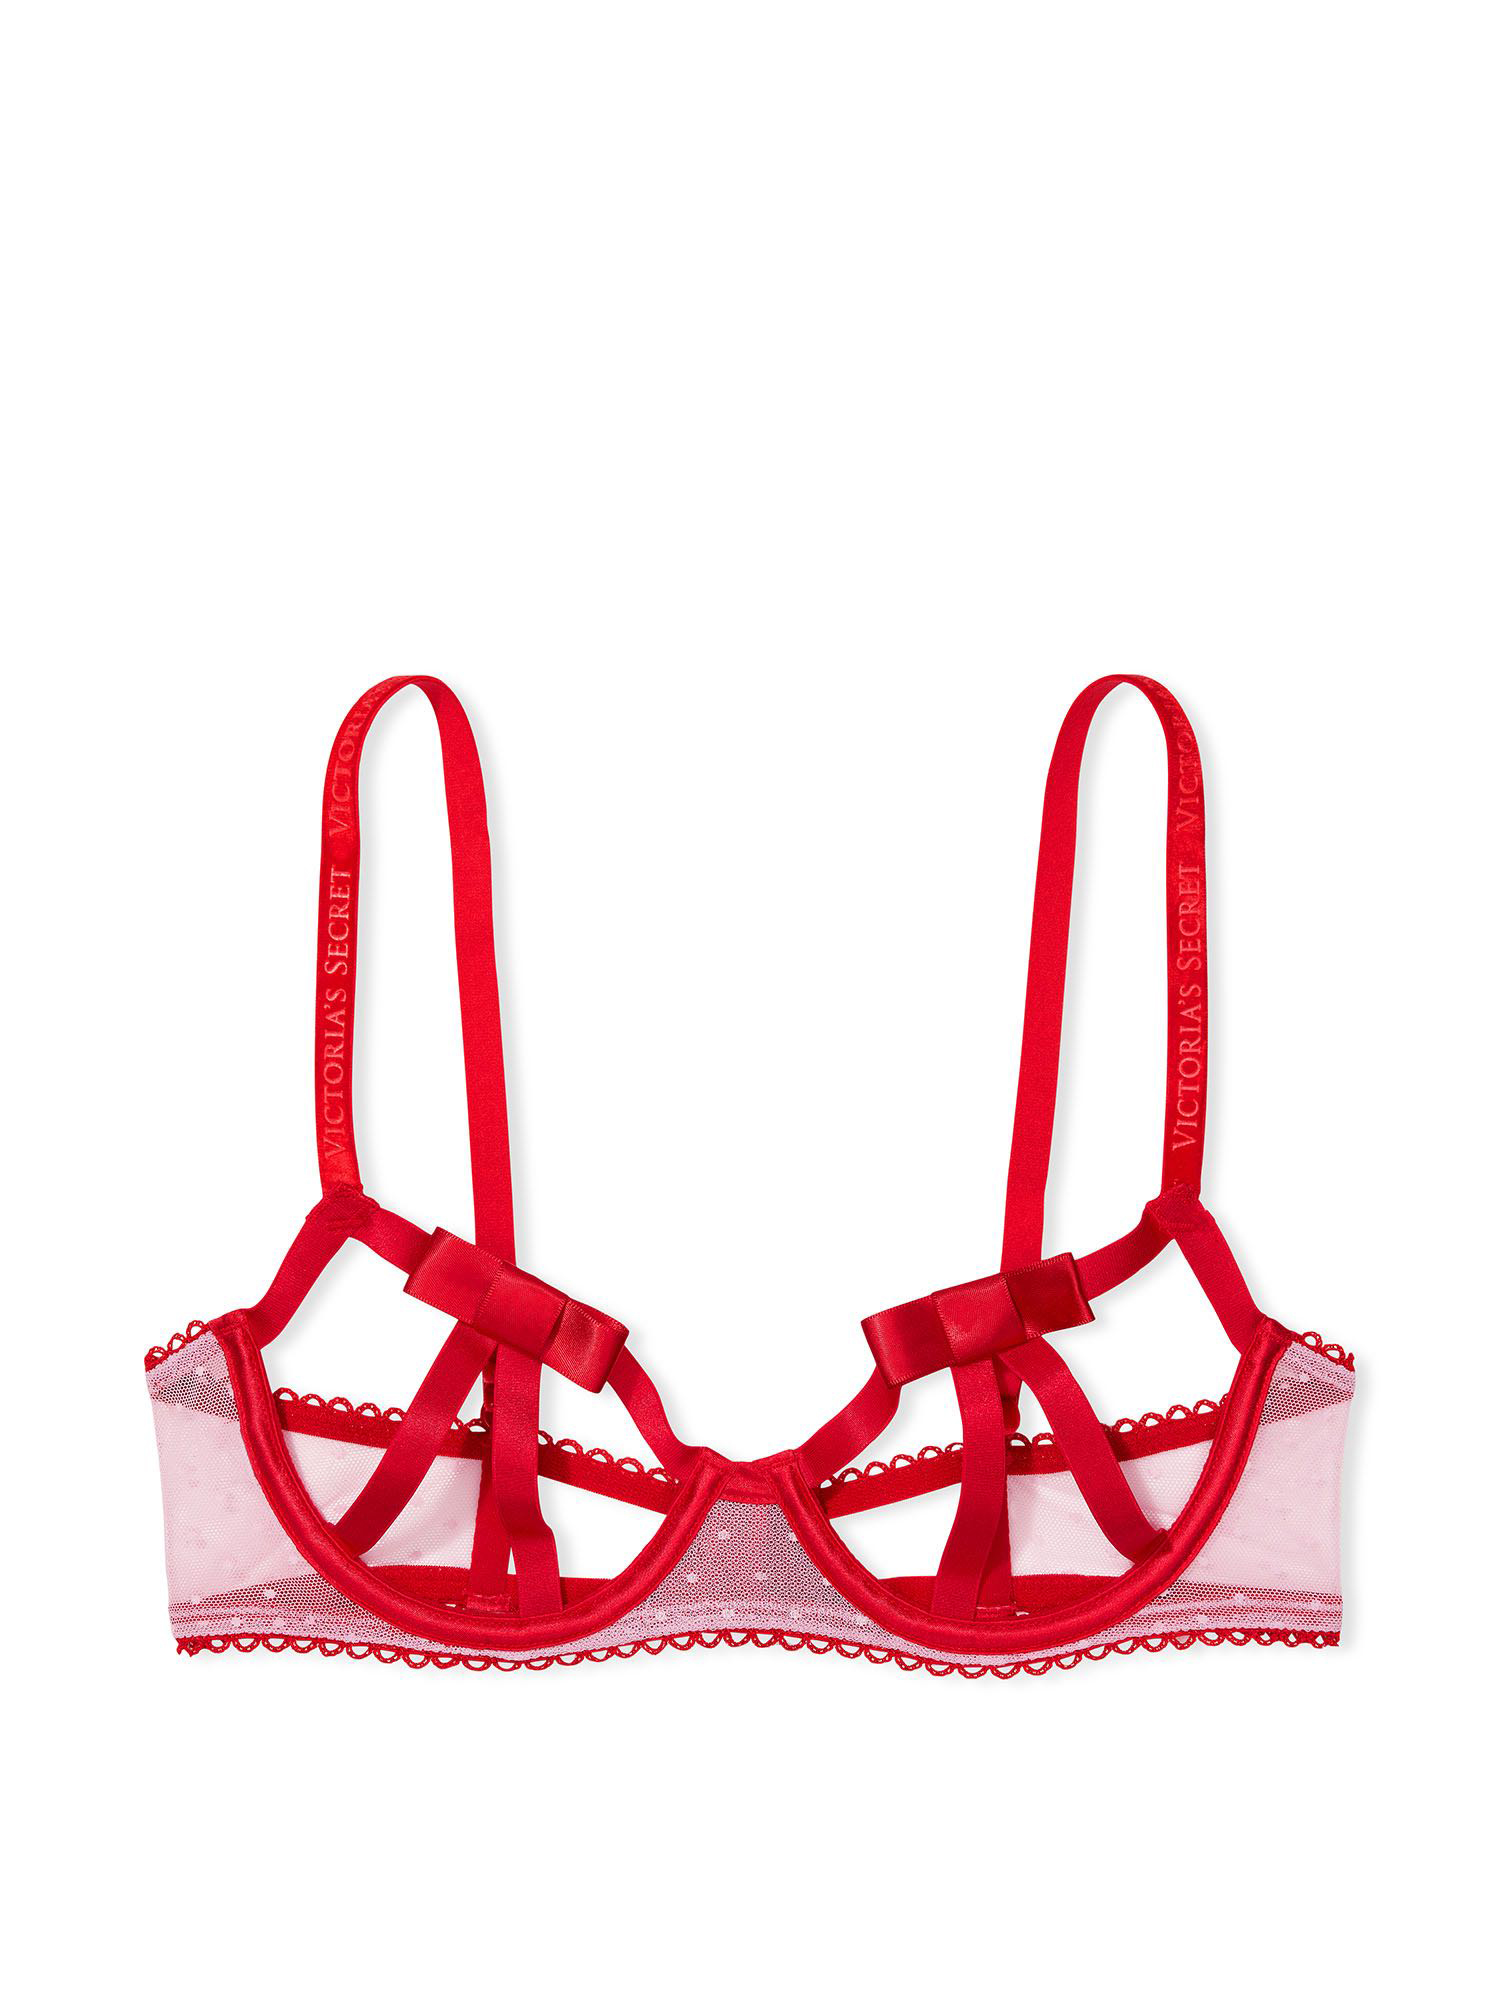 Victorias Secret VERY SEXY Strappy Embroidered Open Cup Balconette